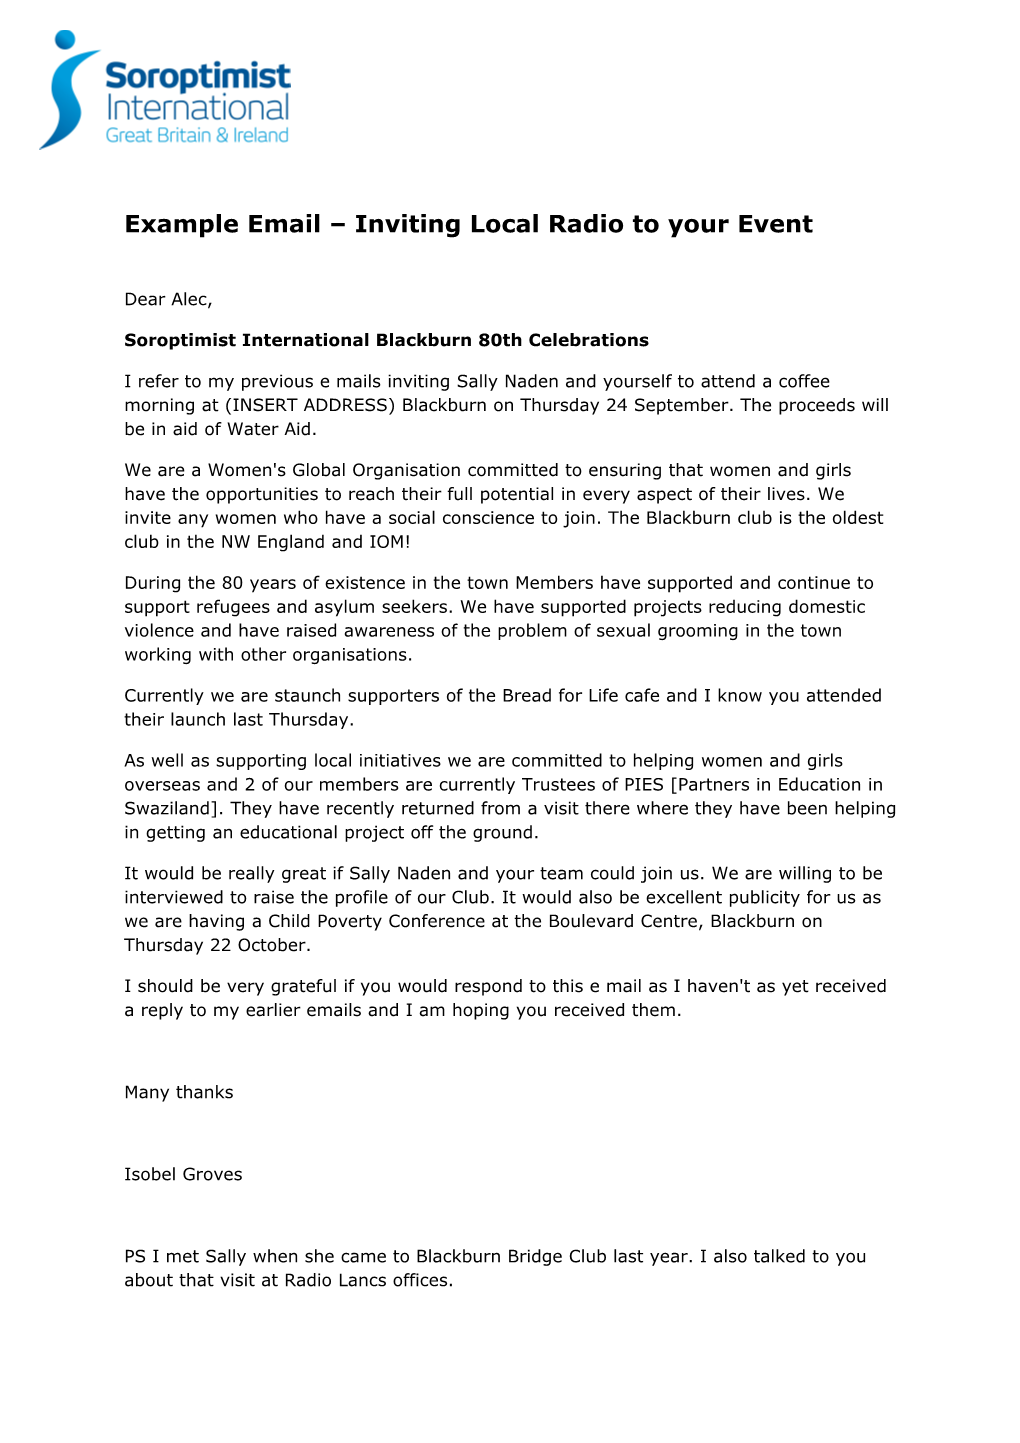 Example Email Inviting Local Radio to Your Event